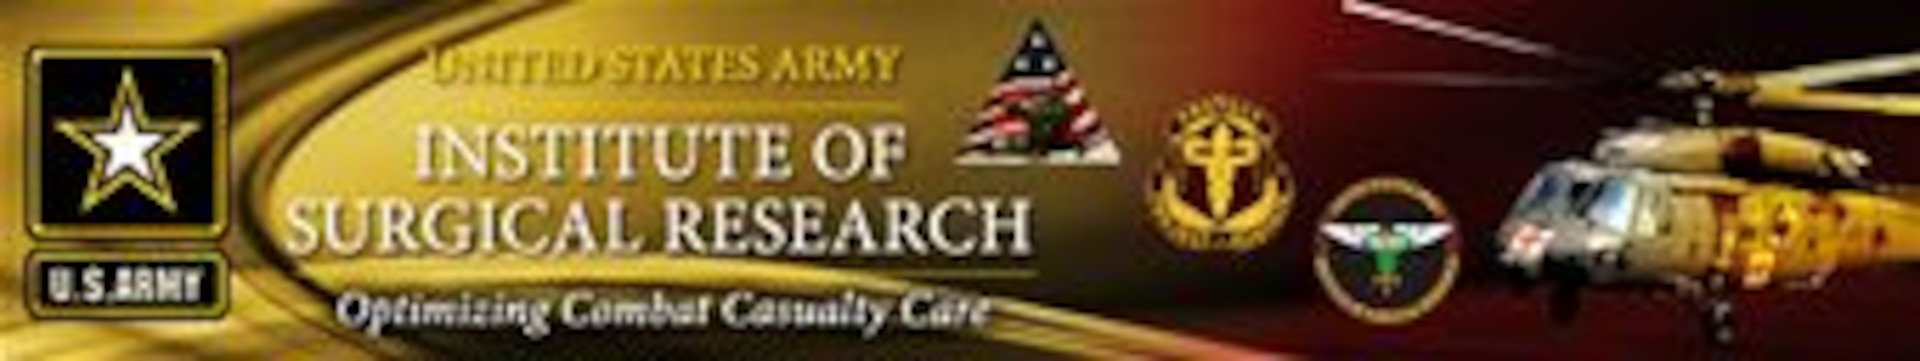 U.S. Army Institute of Surgical Research 